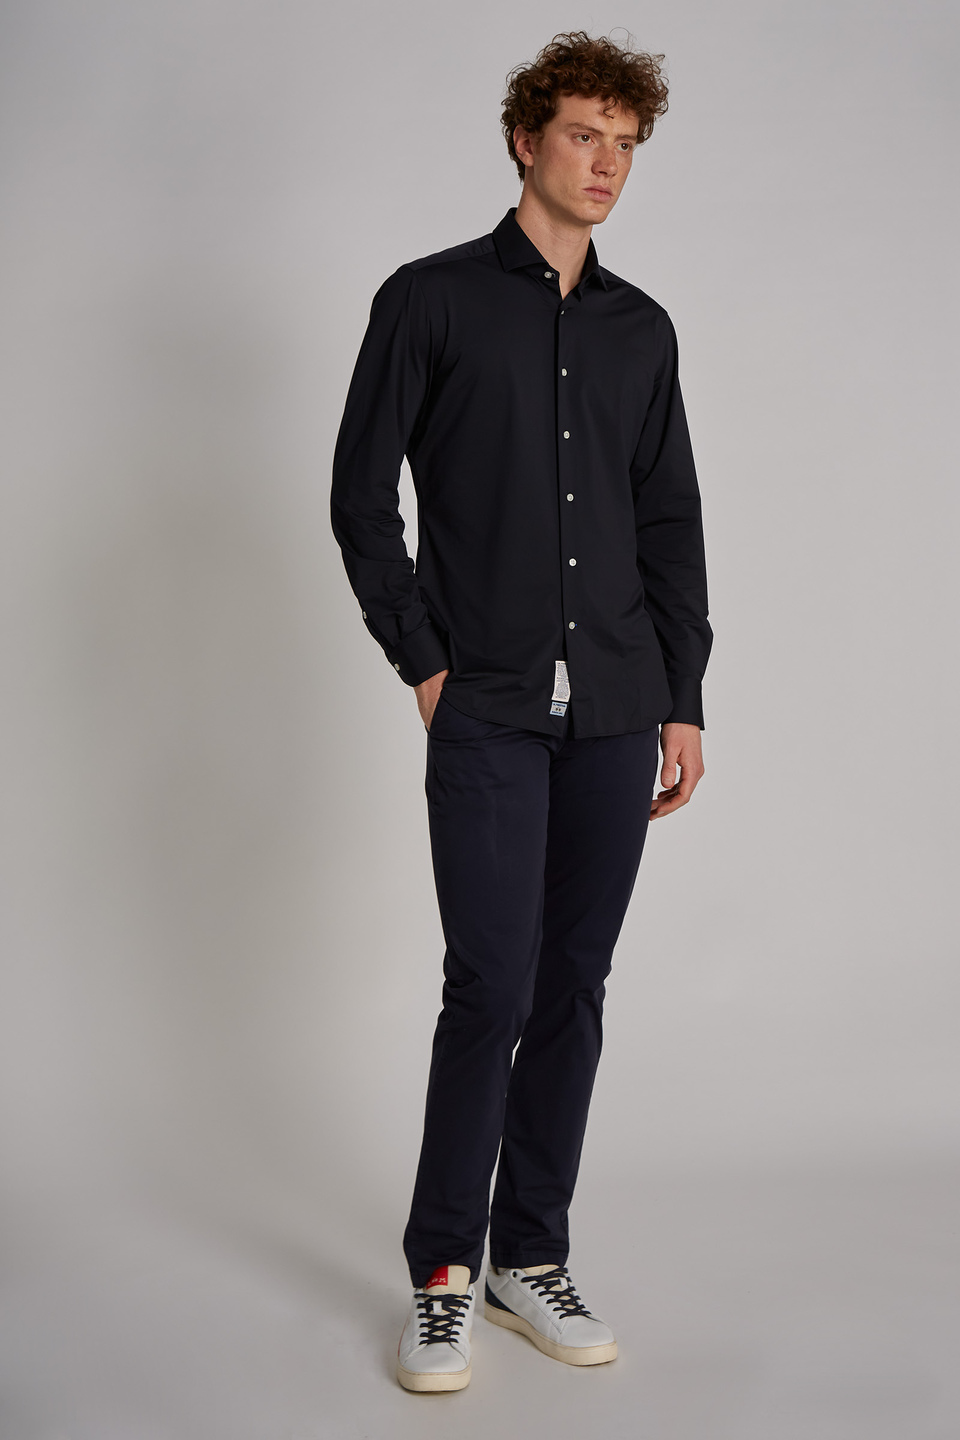 Men's long-sleeved synthetic fabric shirt - La Martina - Official Online Shop